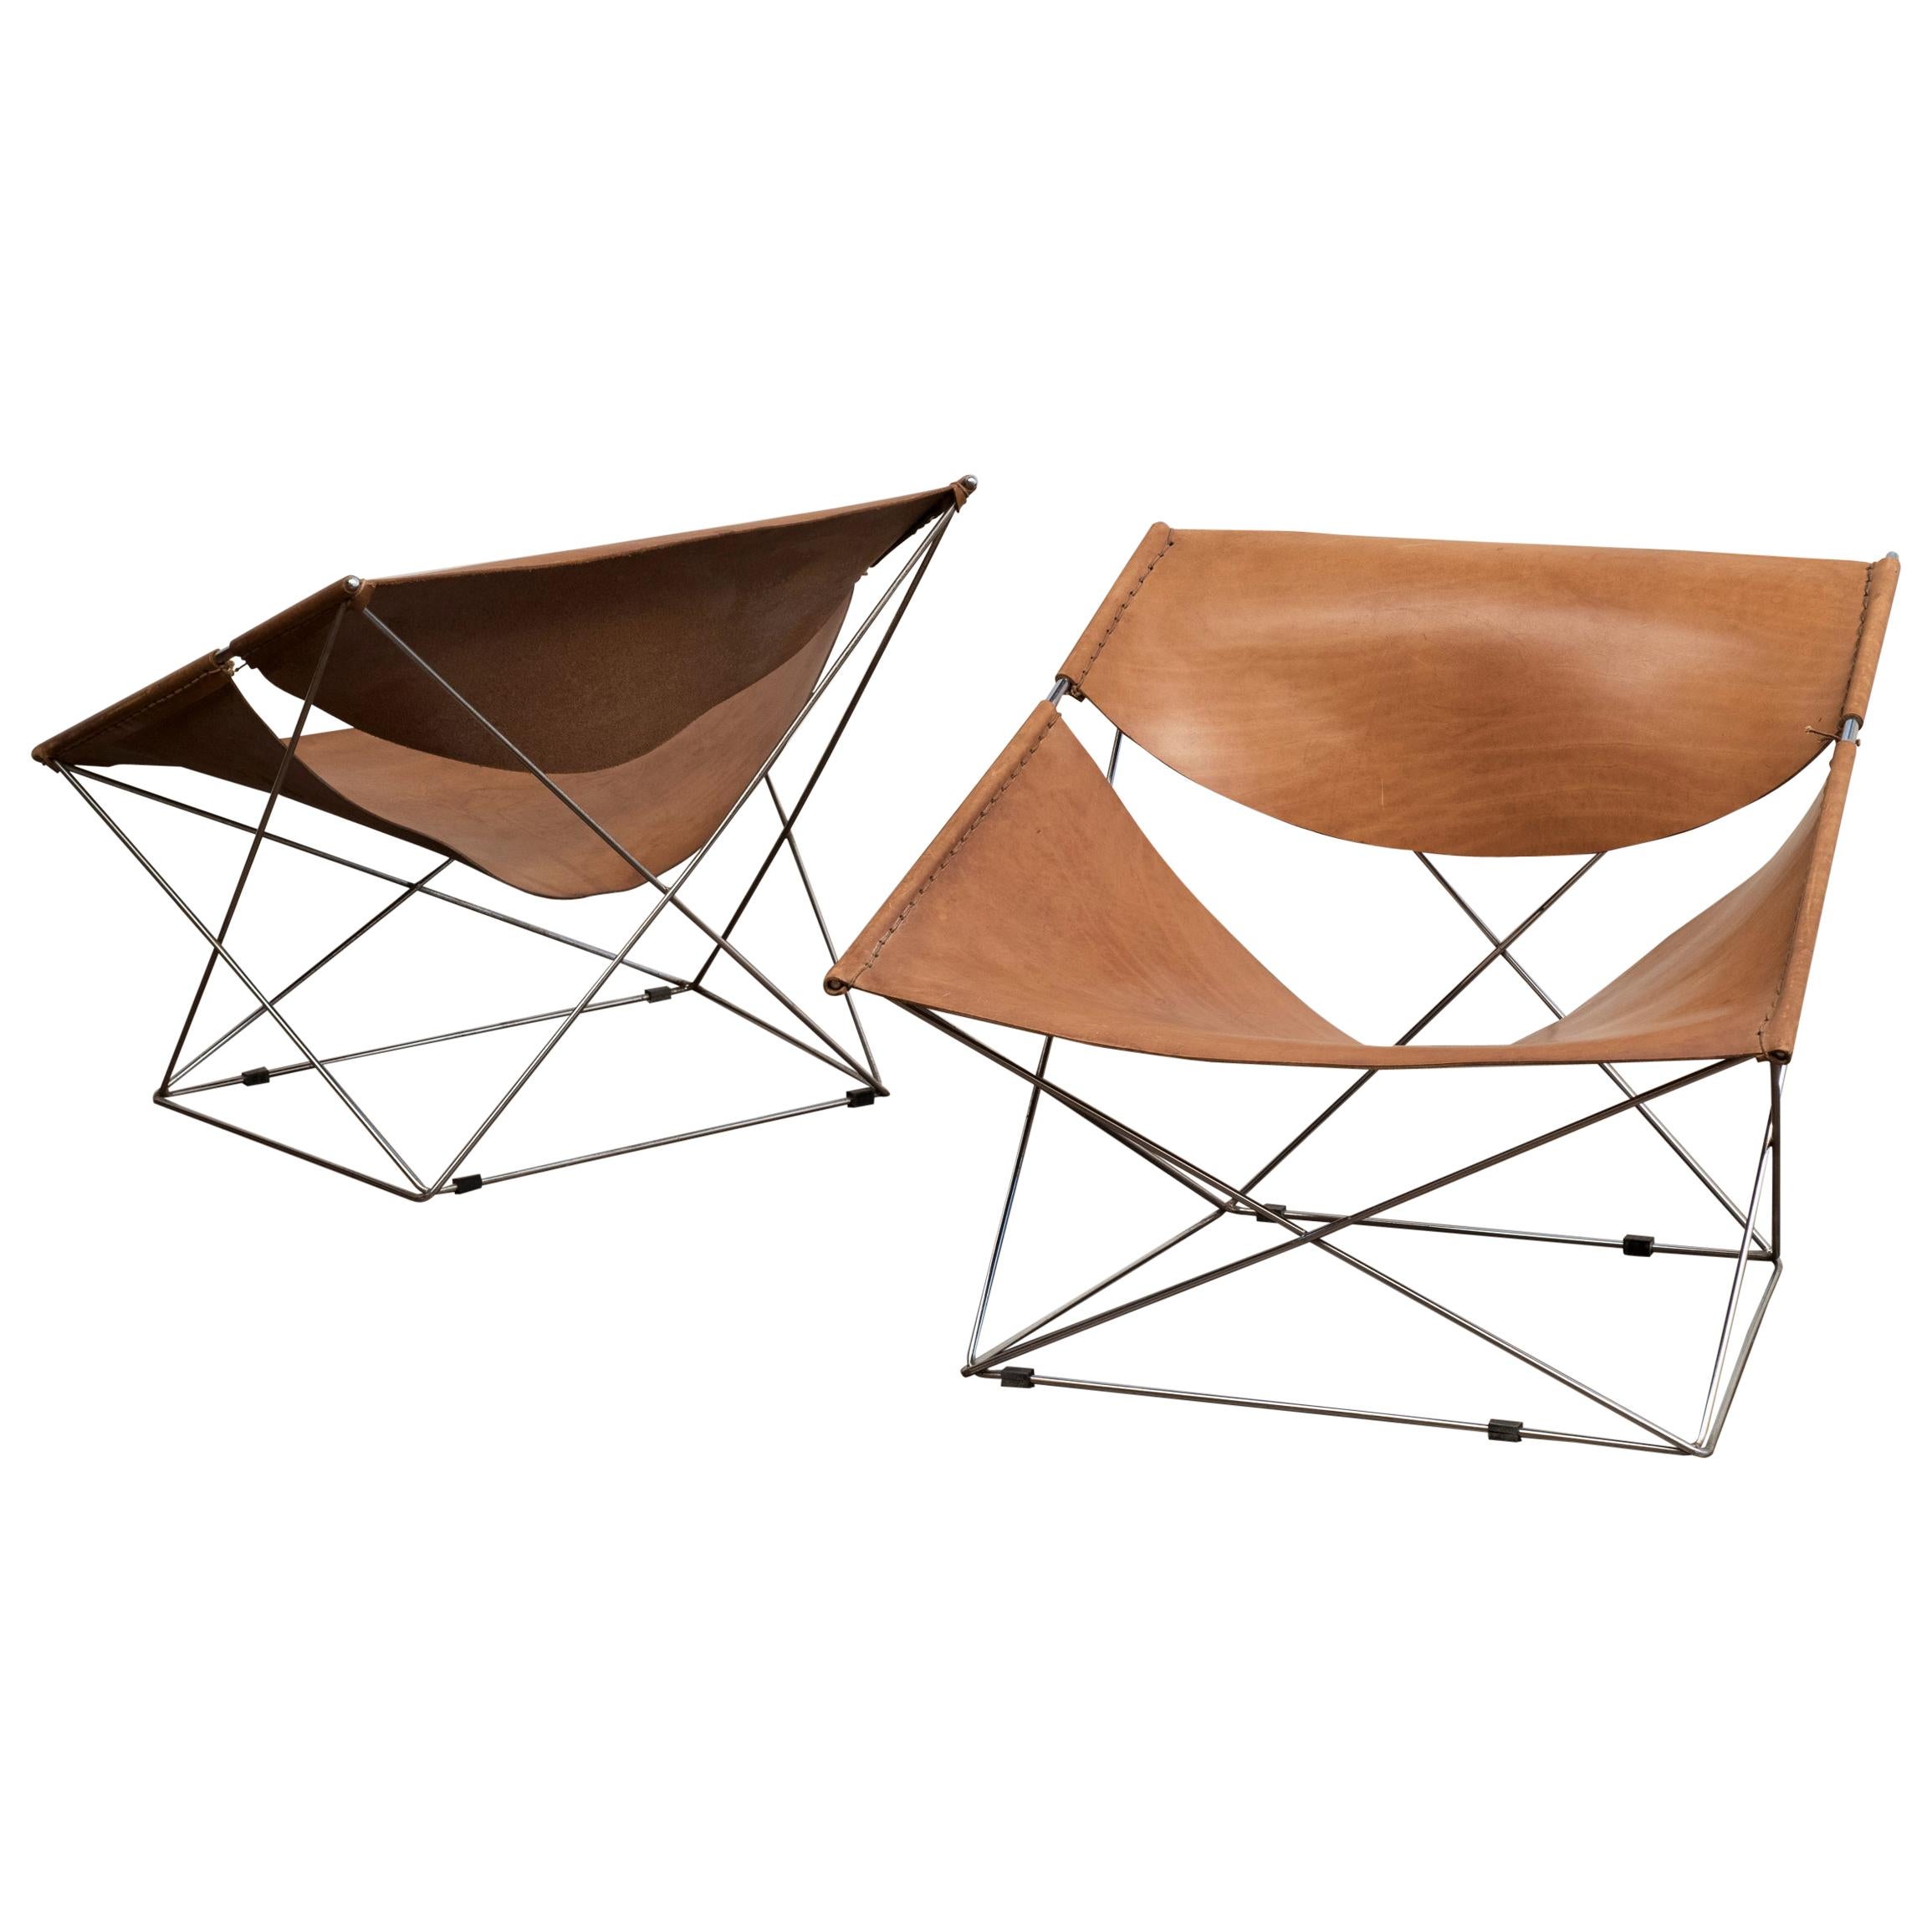 Pair of Pierre Paulin Butterfly Chairs in Original Leather, Netherlands, 1963